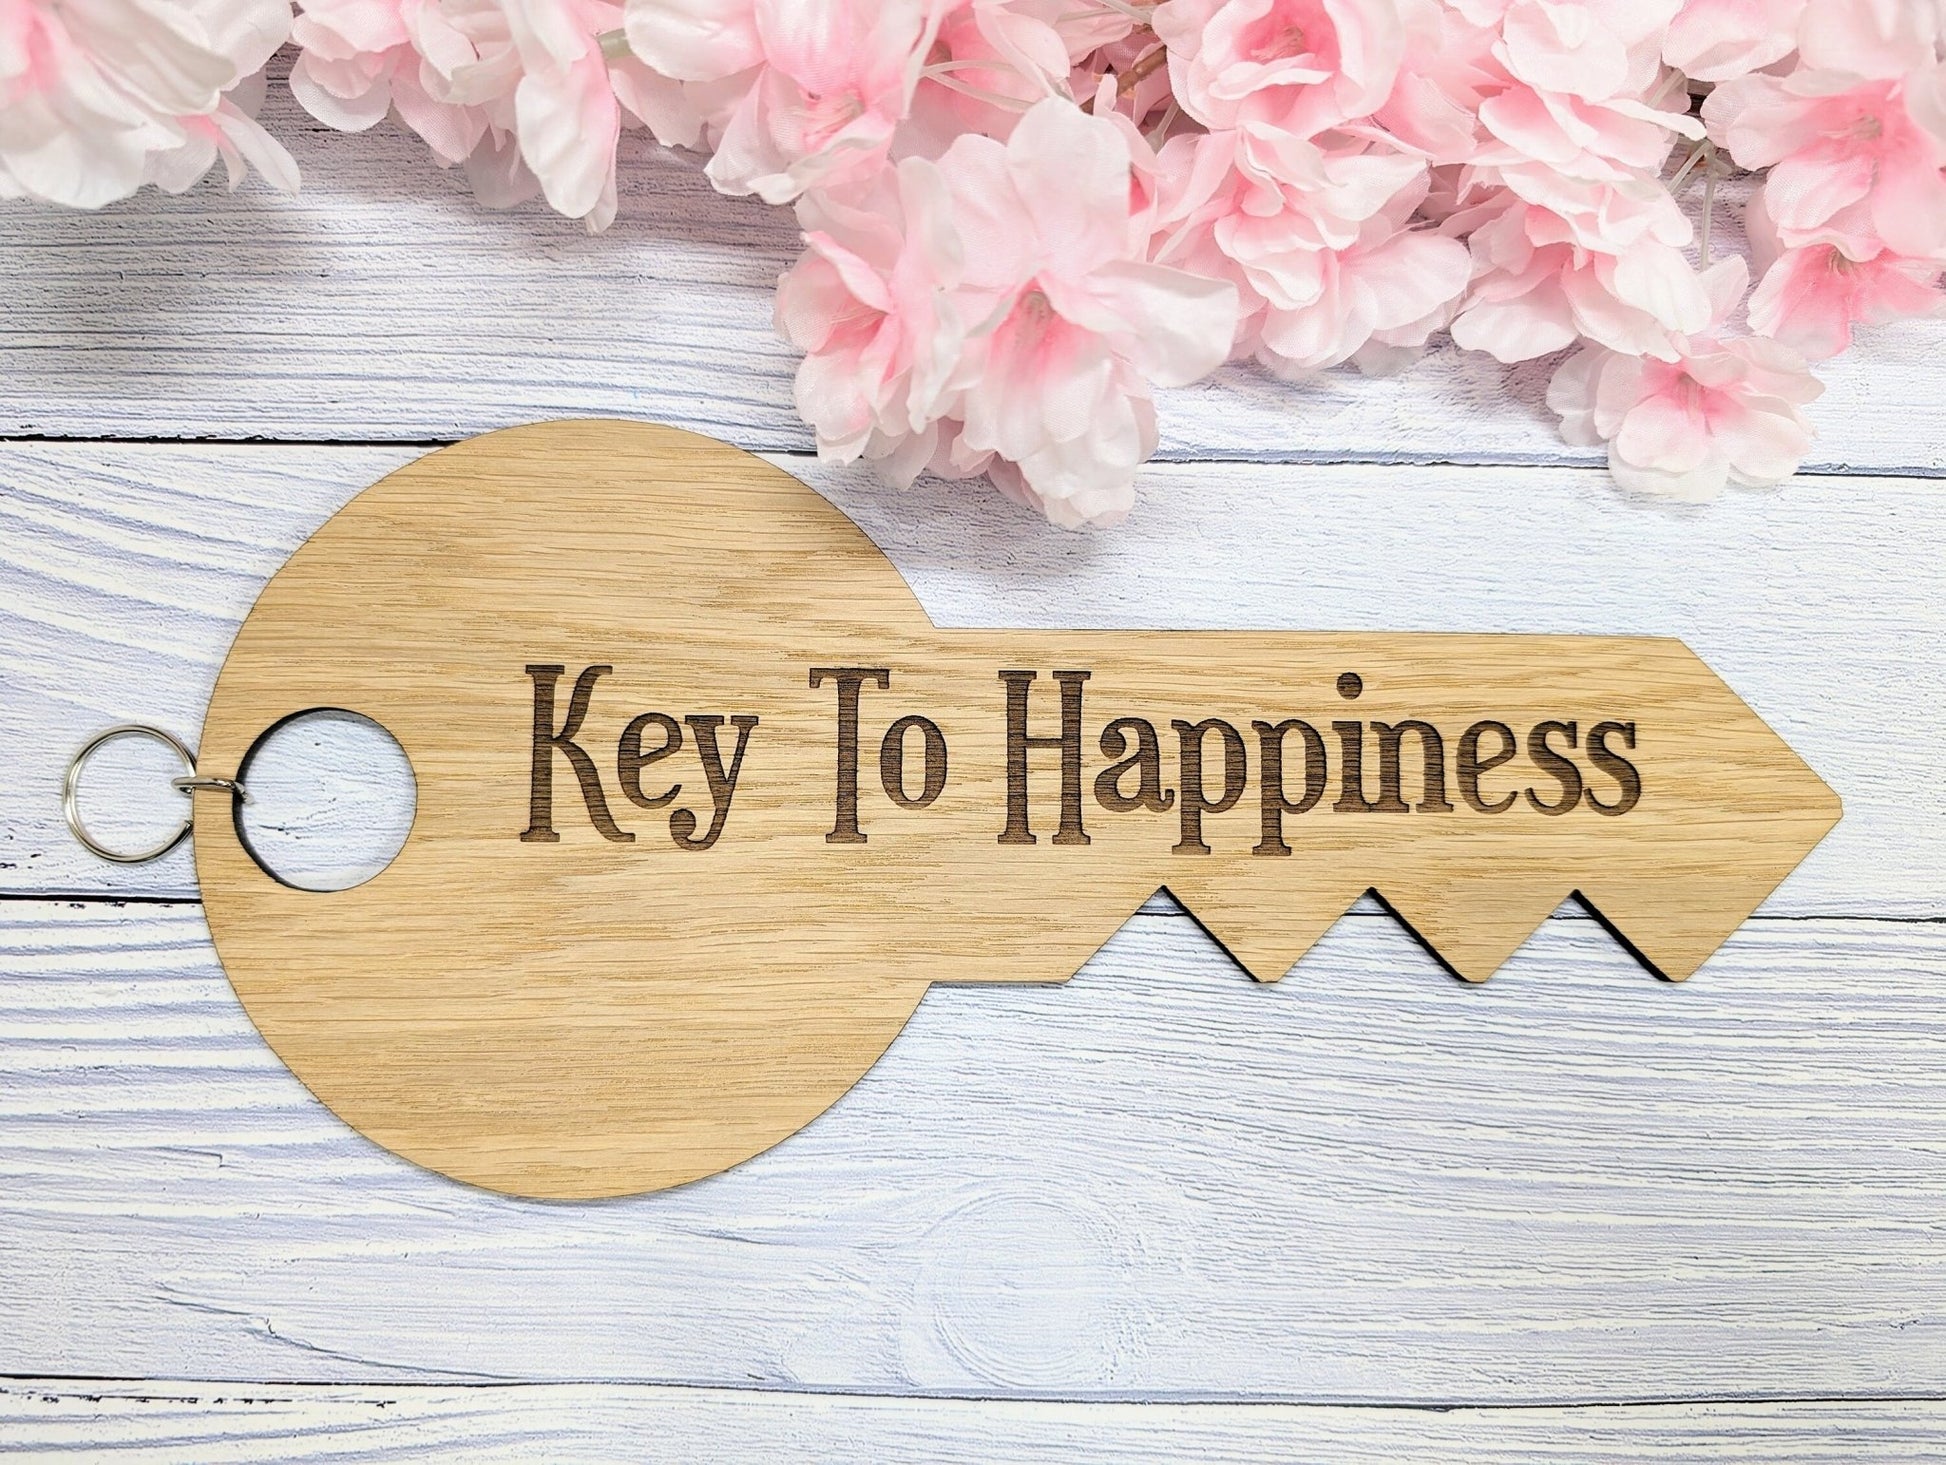 Key To Happiness - Oversized Key-Shaped Wooden Keyring - Unique Gift Idea - Inspirational Quote Keychain - CherryGroveCraft